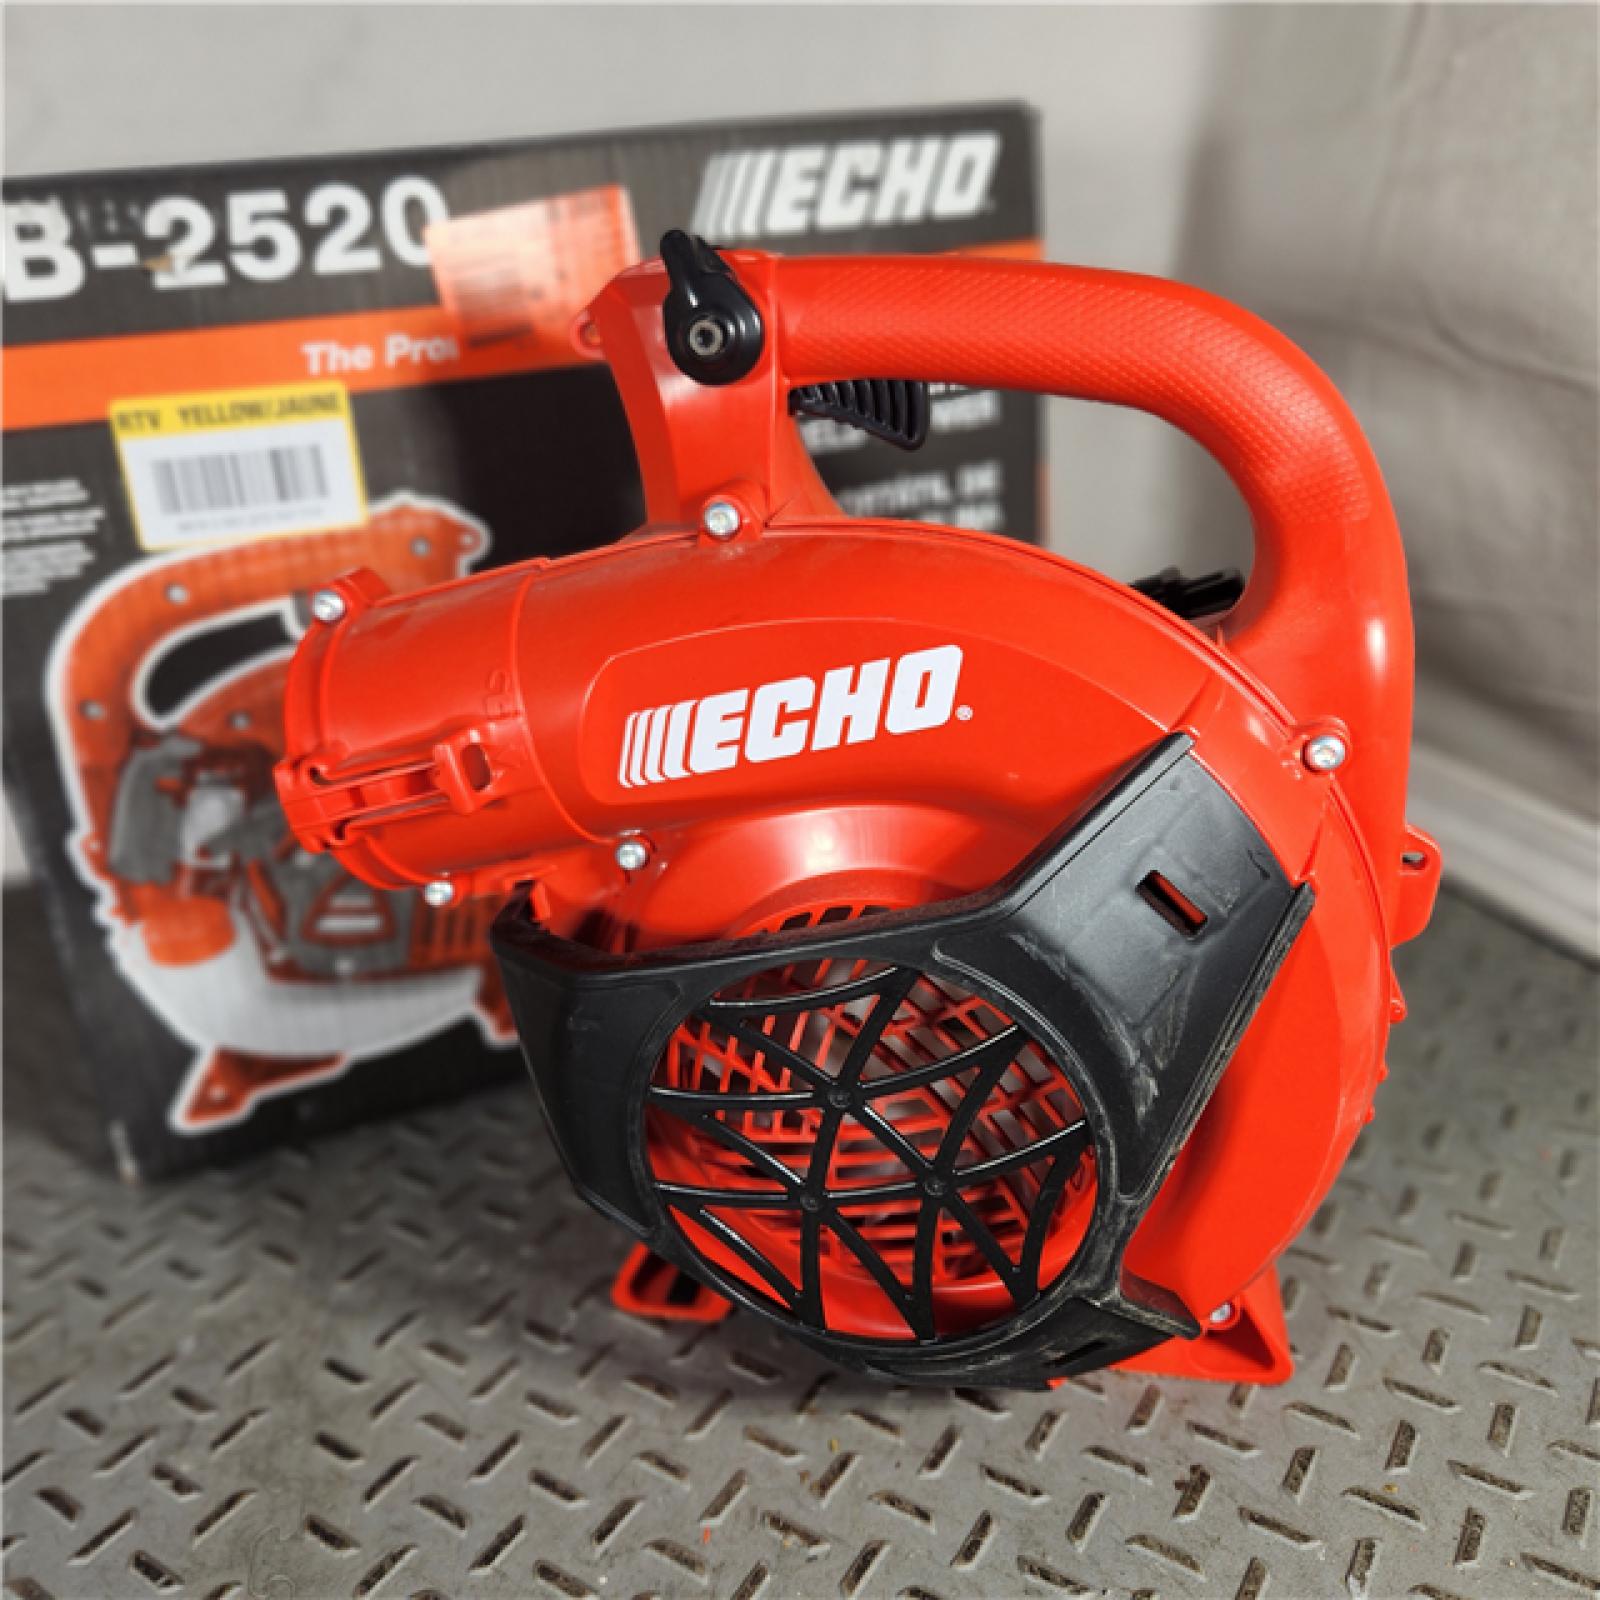 Houston Location - AS-IS ECHO PB-2520AA Handheld Blower Gas 25.4cc Engine - Appears IN GOOD Condition